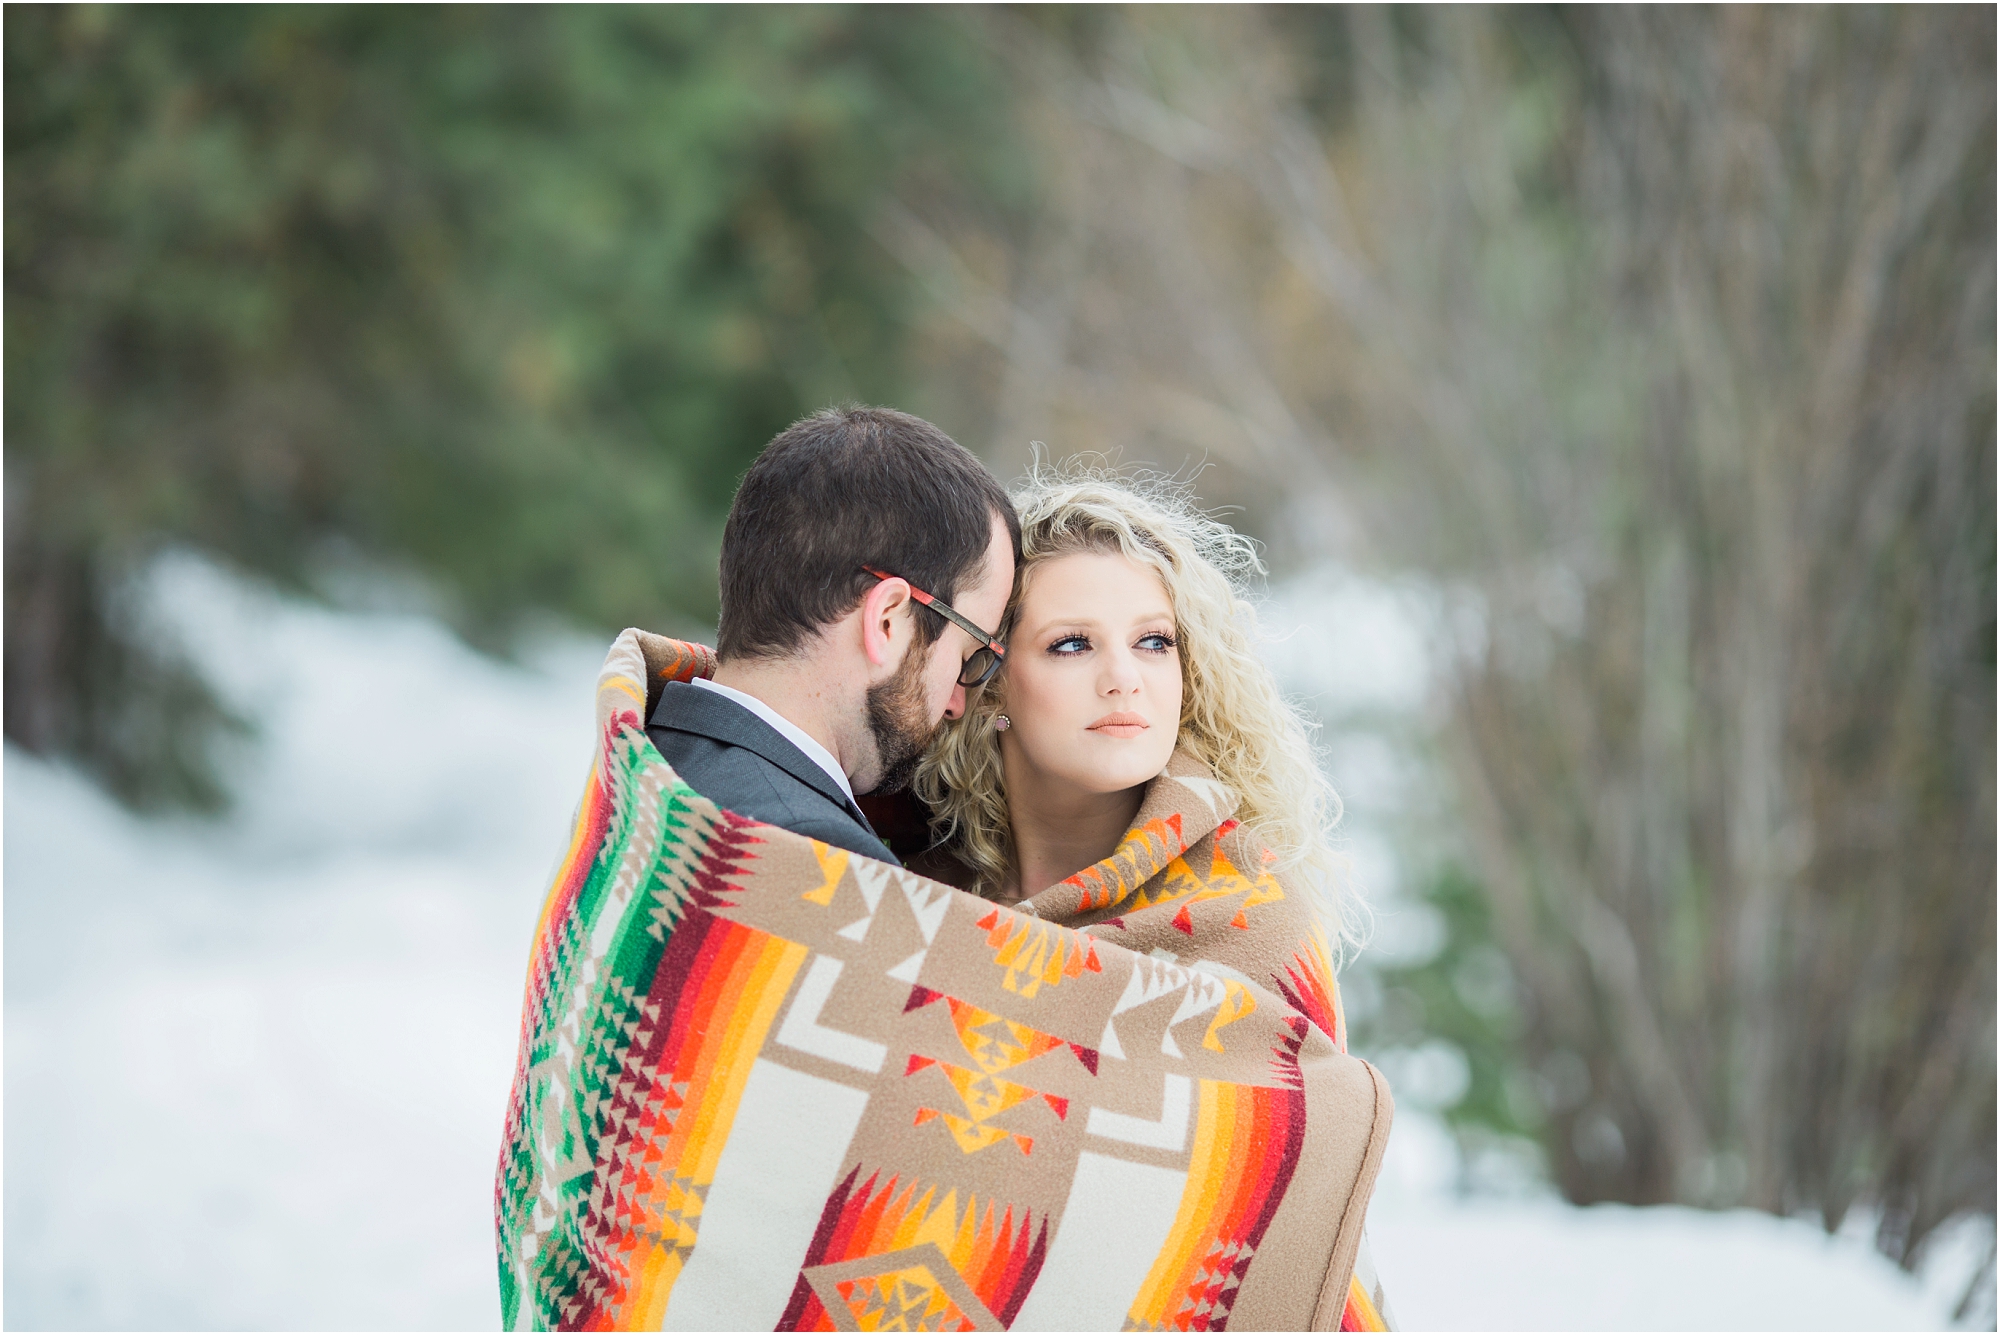 A wedding couple wrapped in a Pendleton wool blanket outside in the snow in Leavenworth, WA. | Erica Swantek Photography